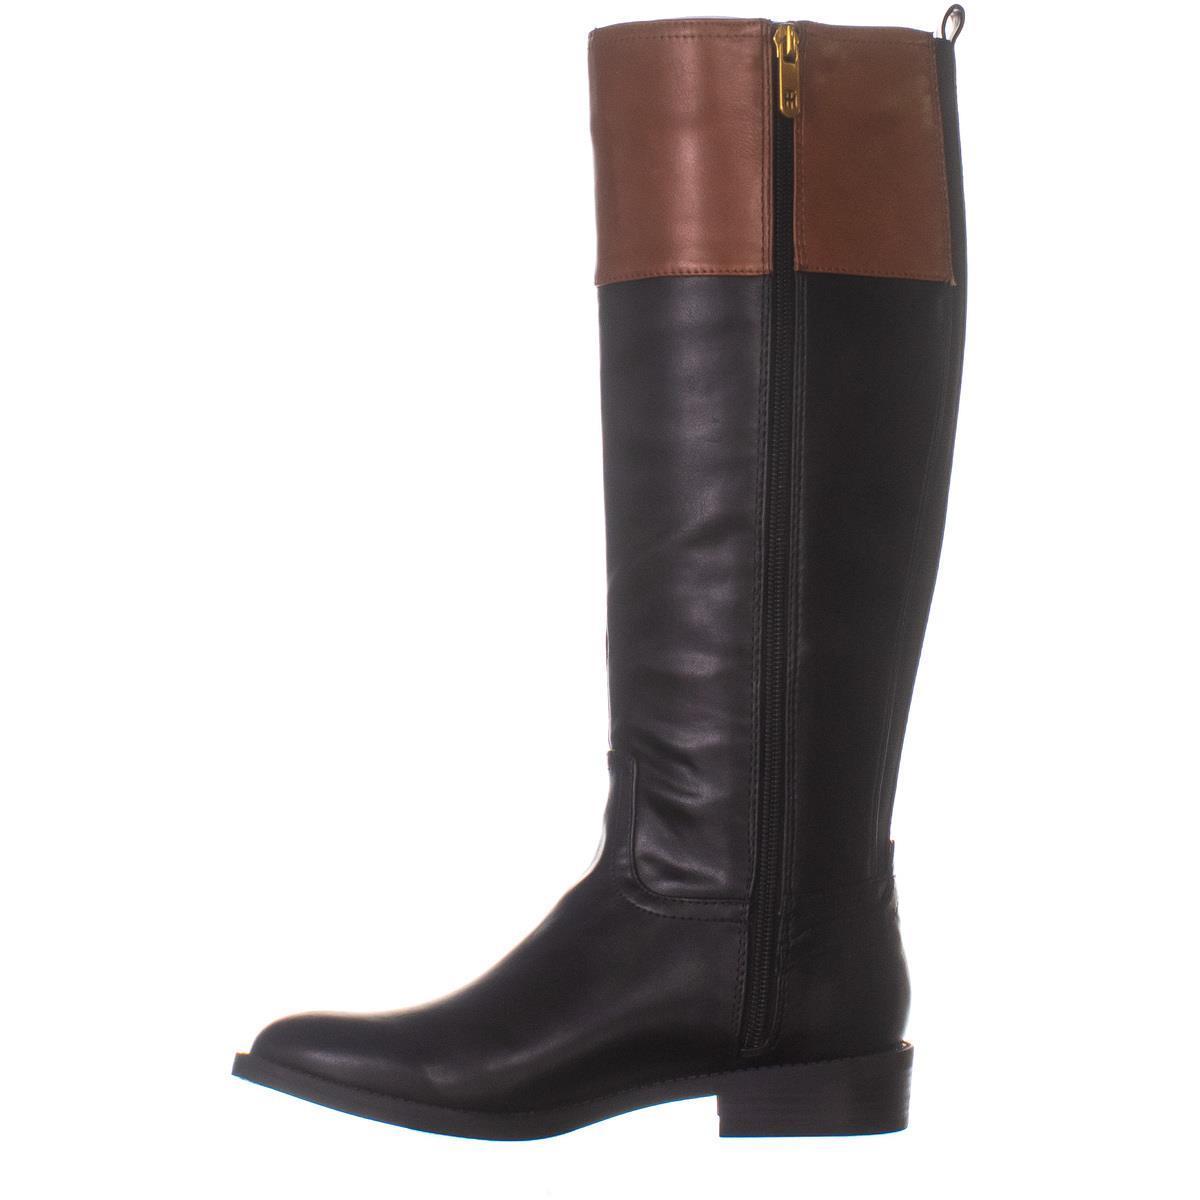 Tommy Hilfiger Ilia4 Knee High Riding Boots 208, Black Multi, 6 US - Boots